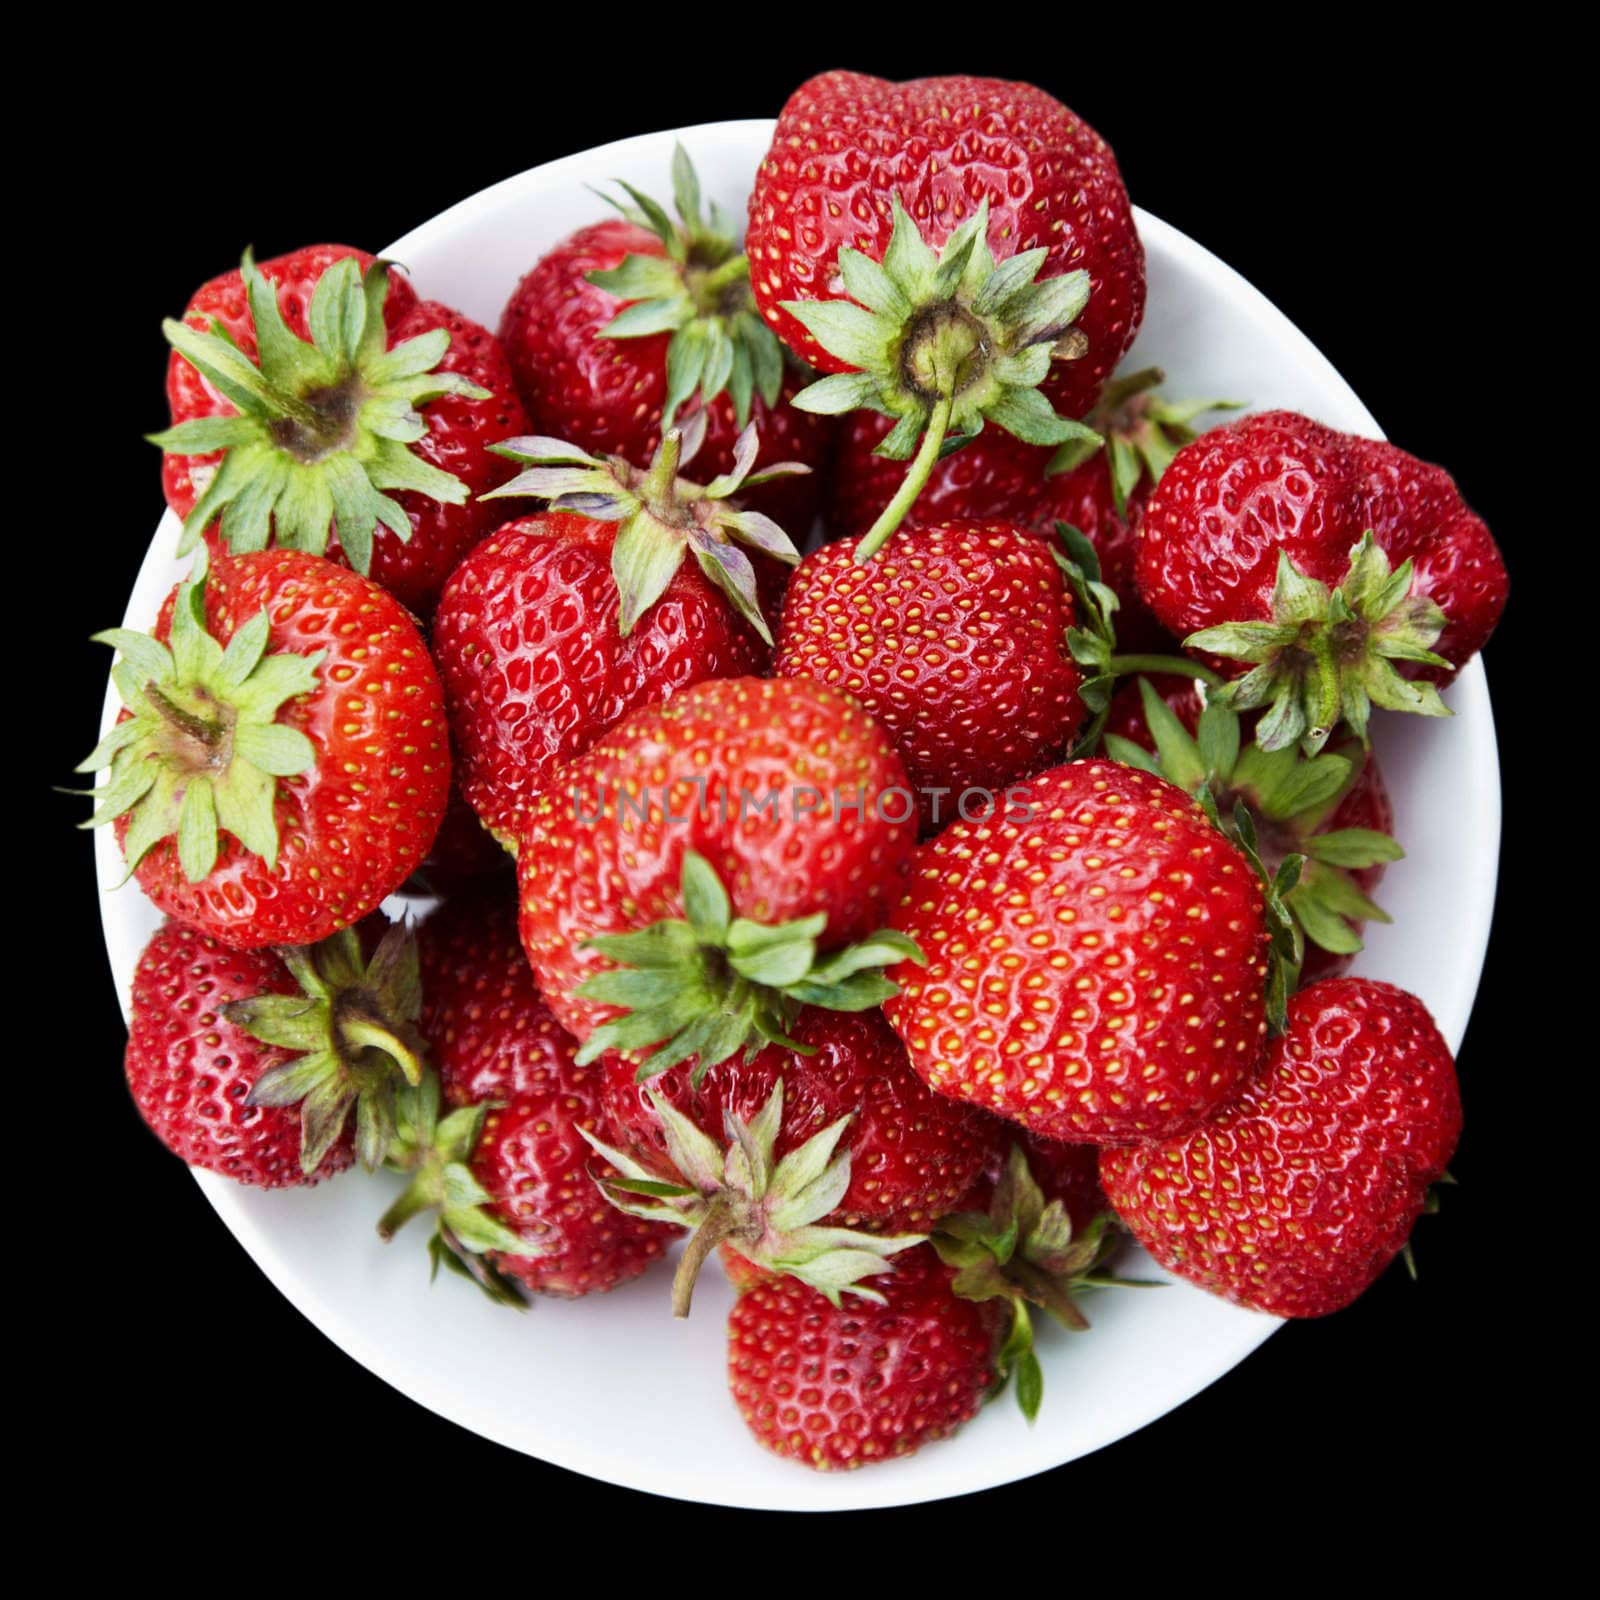 Strawberries on a plate isolated on a black background